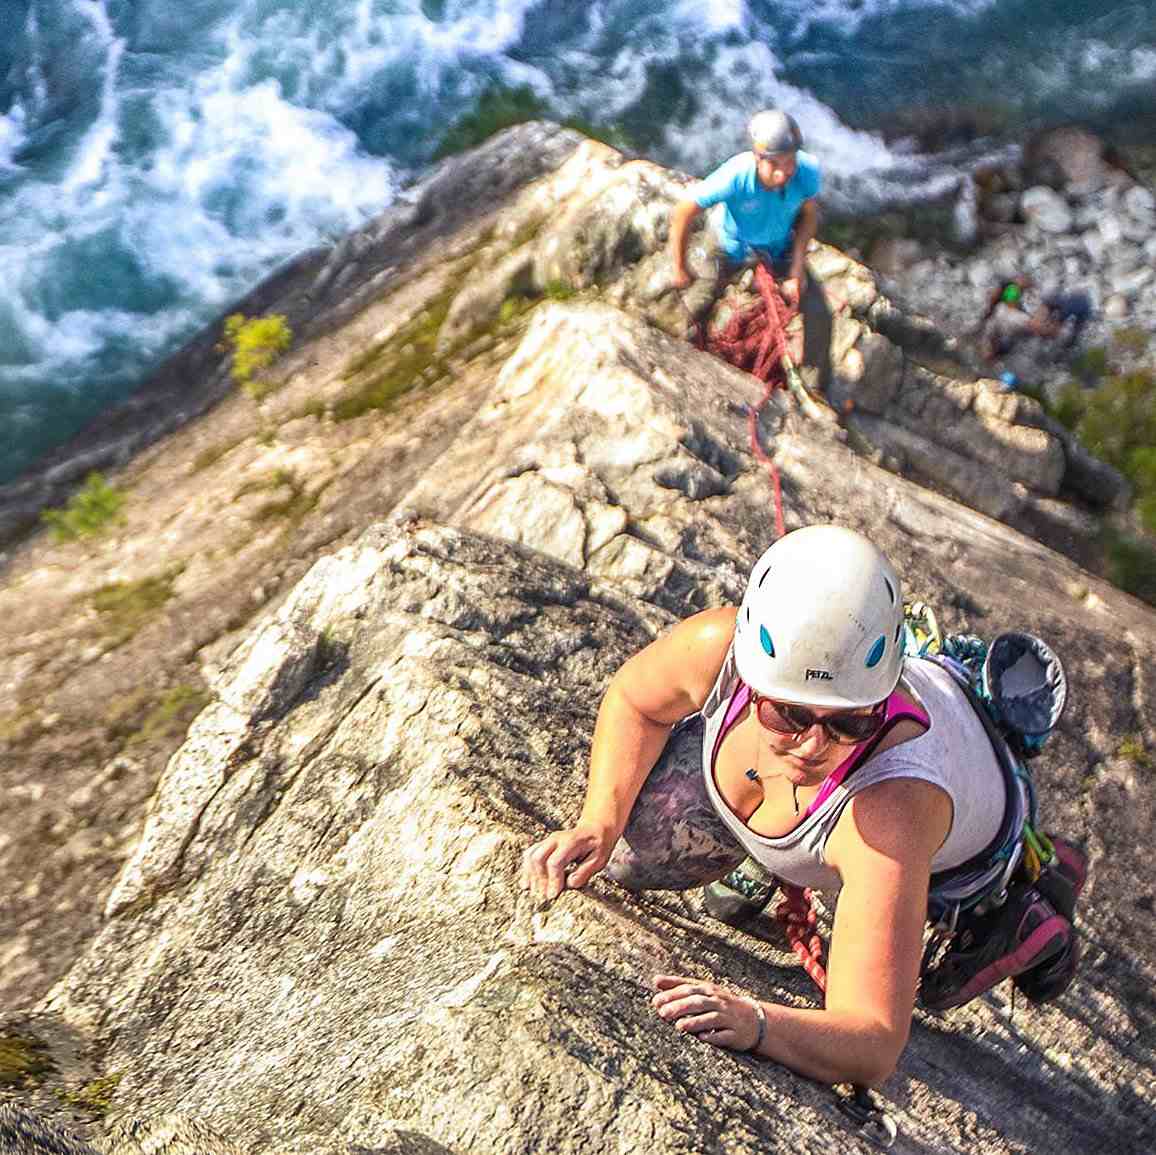 Looking down an arete at a female climber in white top and helmet, above blue river rapids,